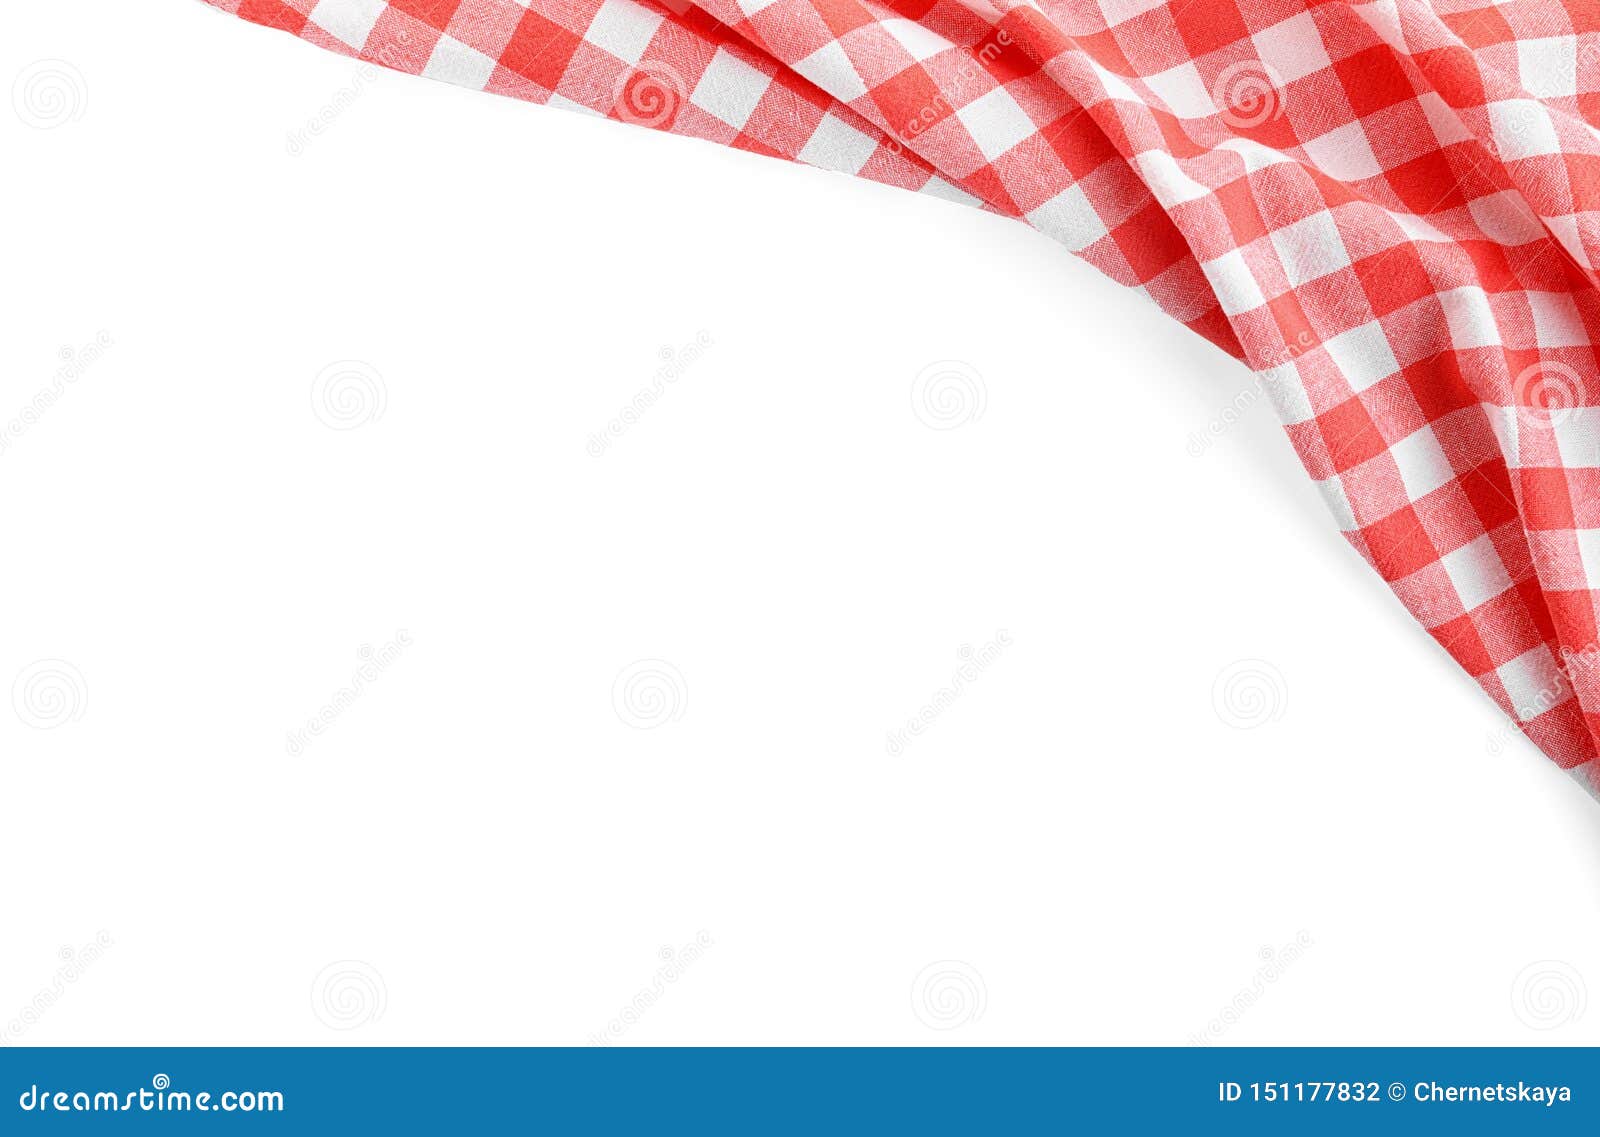 Classic Red Checkered Blanket Isolated On White Stock Photo Image Of Isolated